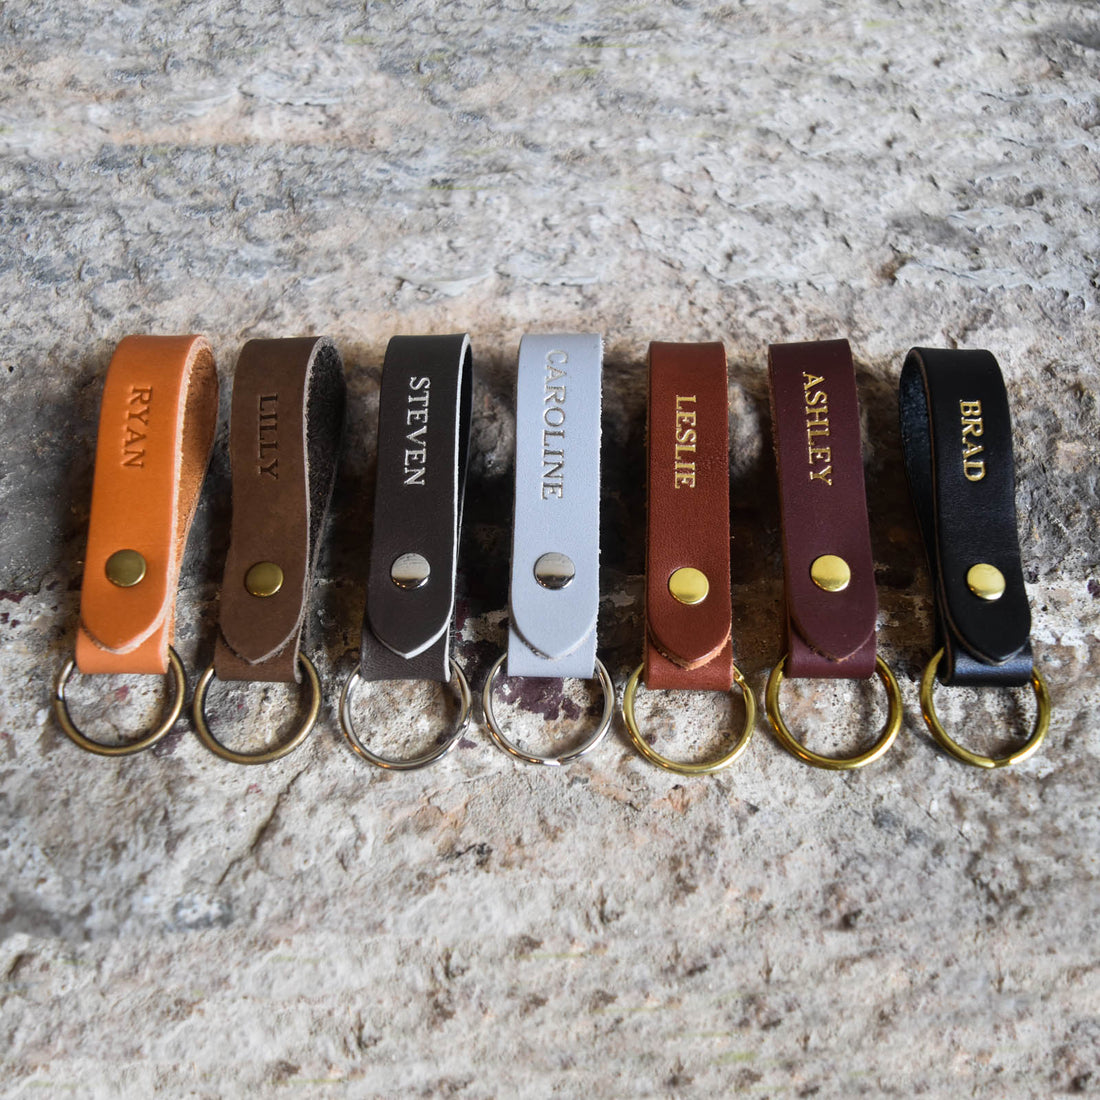 Classic Design Car KeyChain Leather Lanyard Pendant for men and